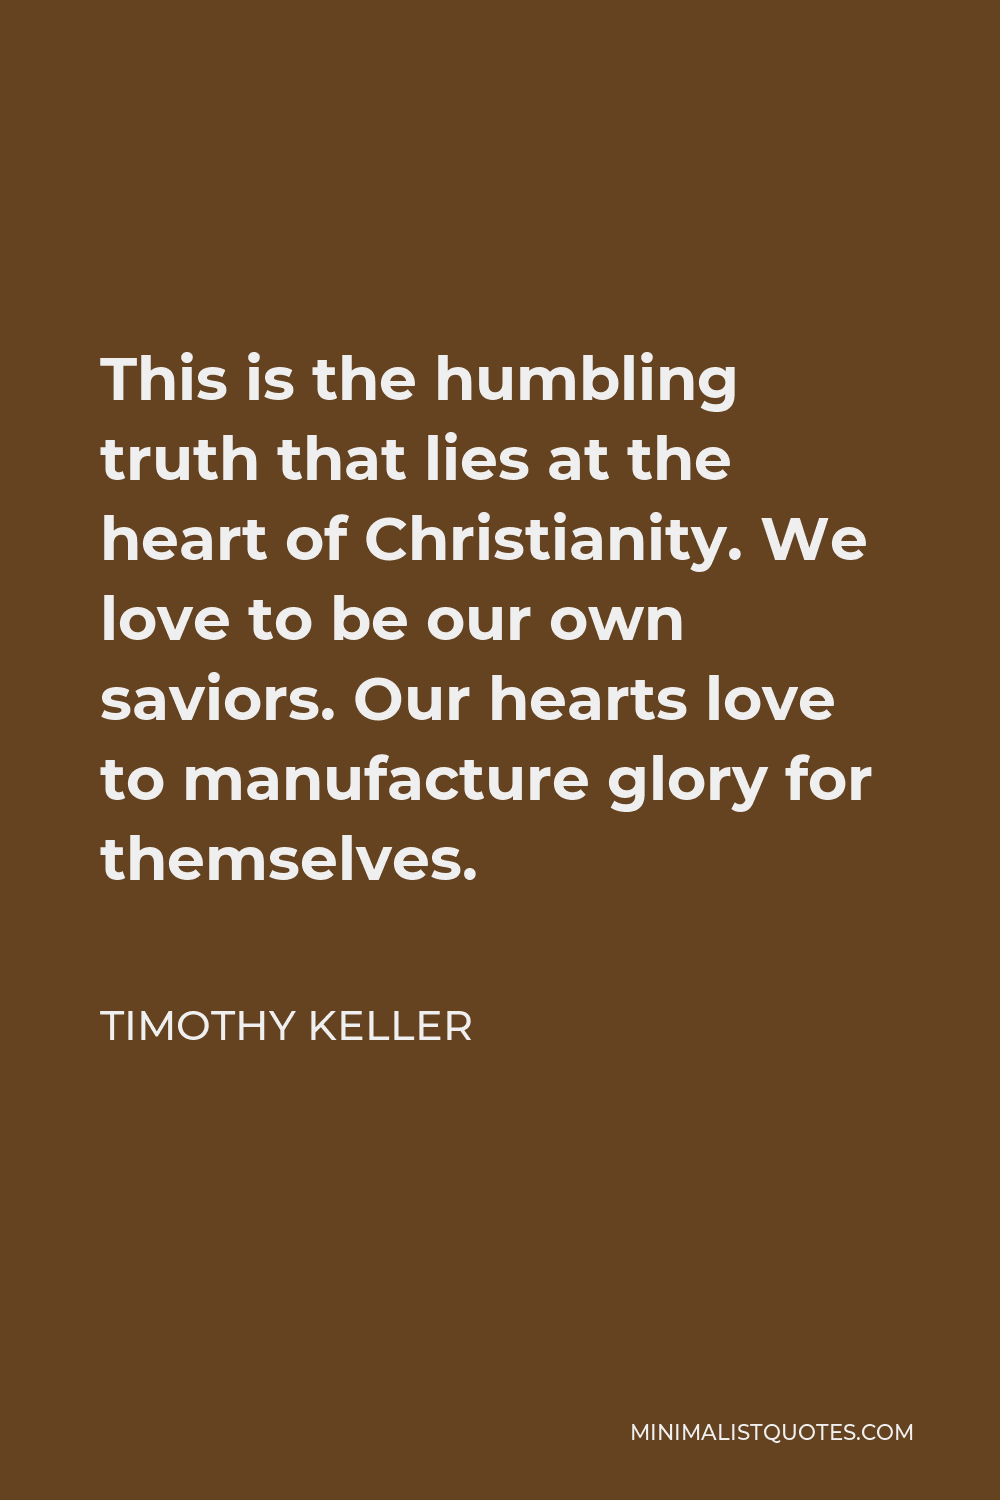 Timothy Keller Quote - This is the humbling truth that lies at the heart of Christianity. We love to be our own saviors. Our hearts love to manufacture glory for themselves.